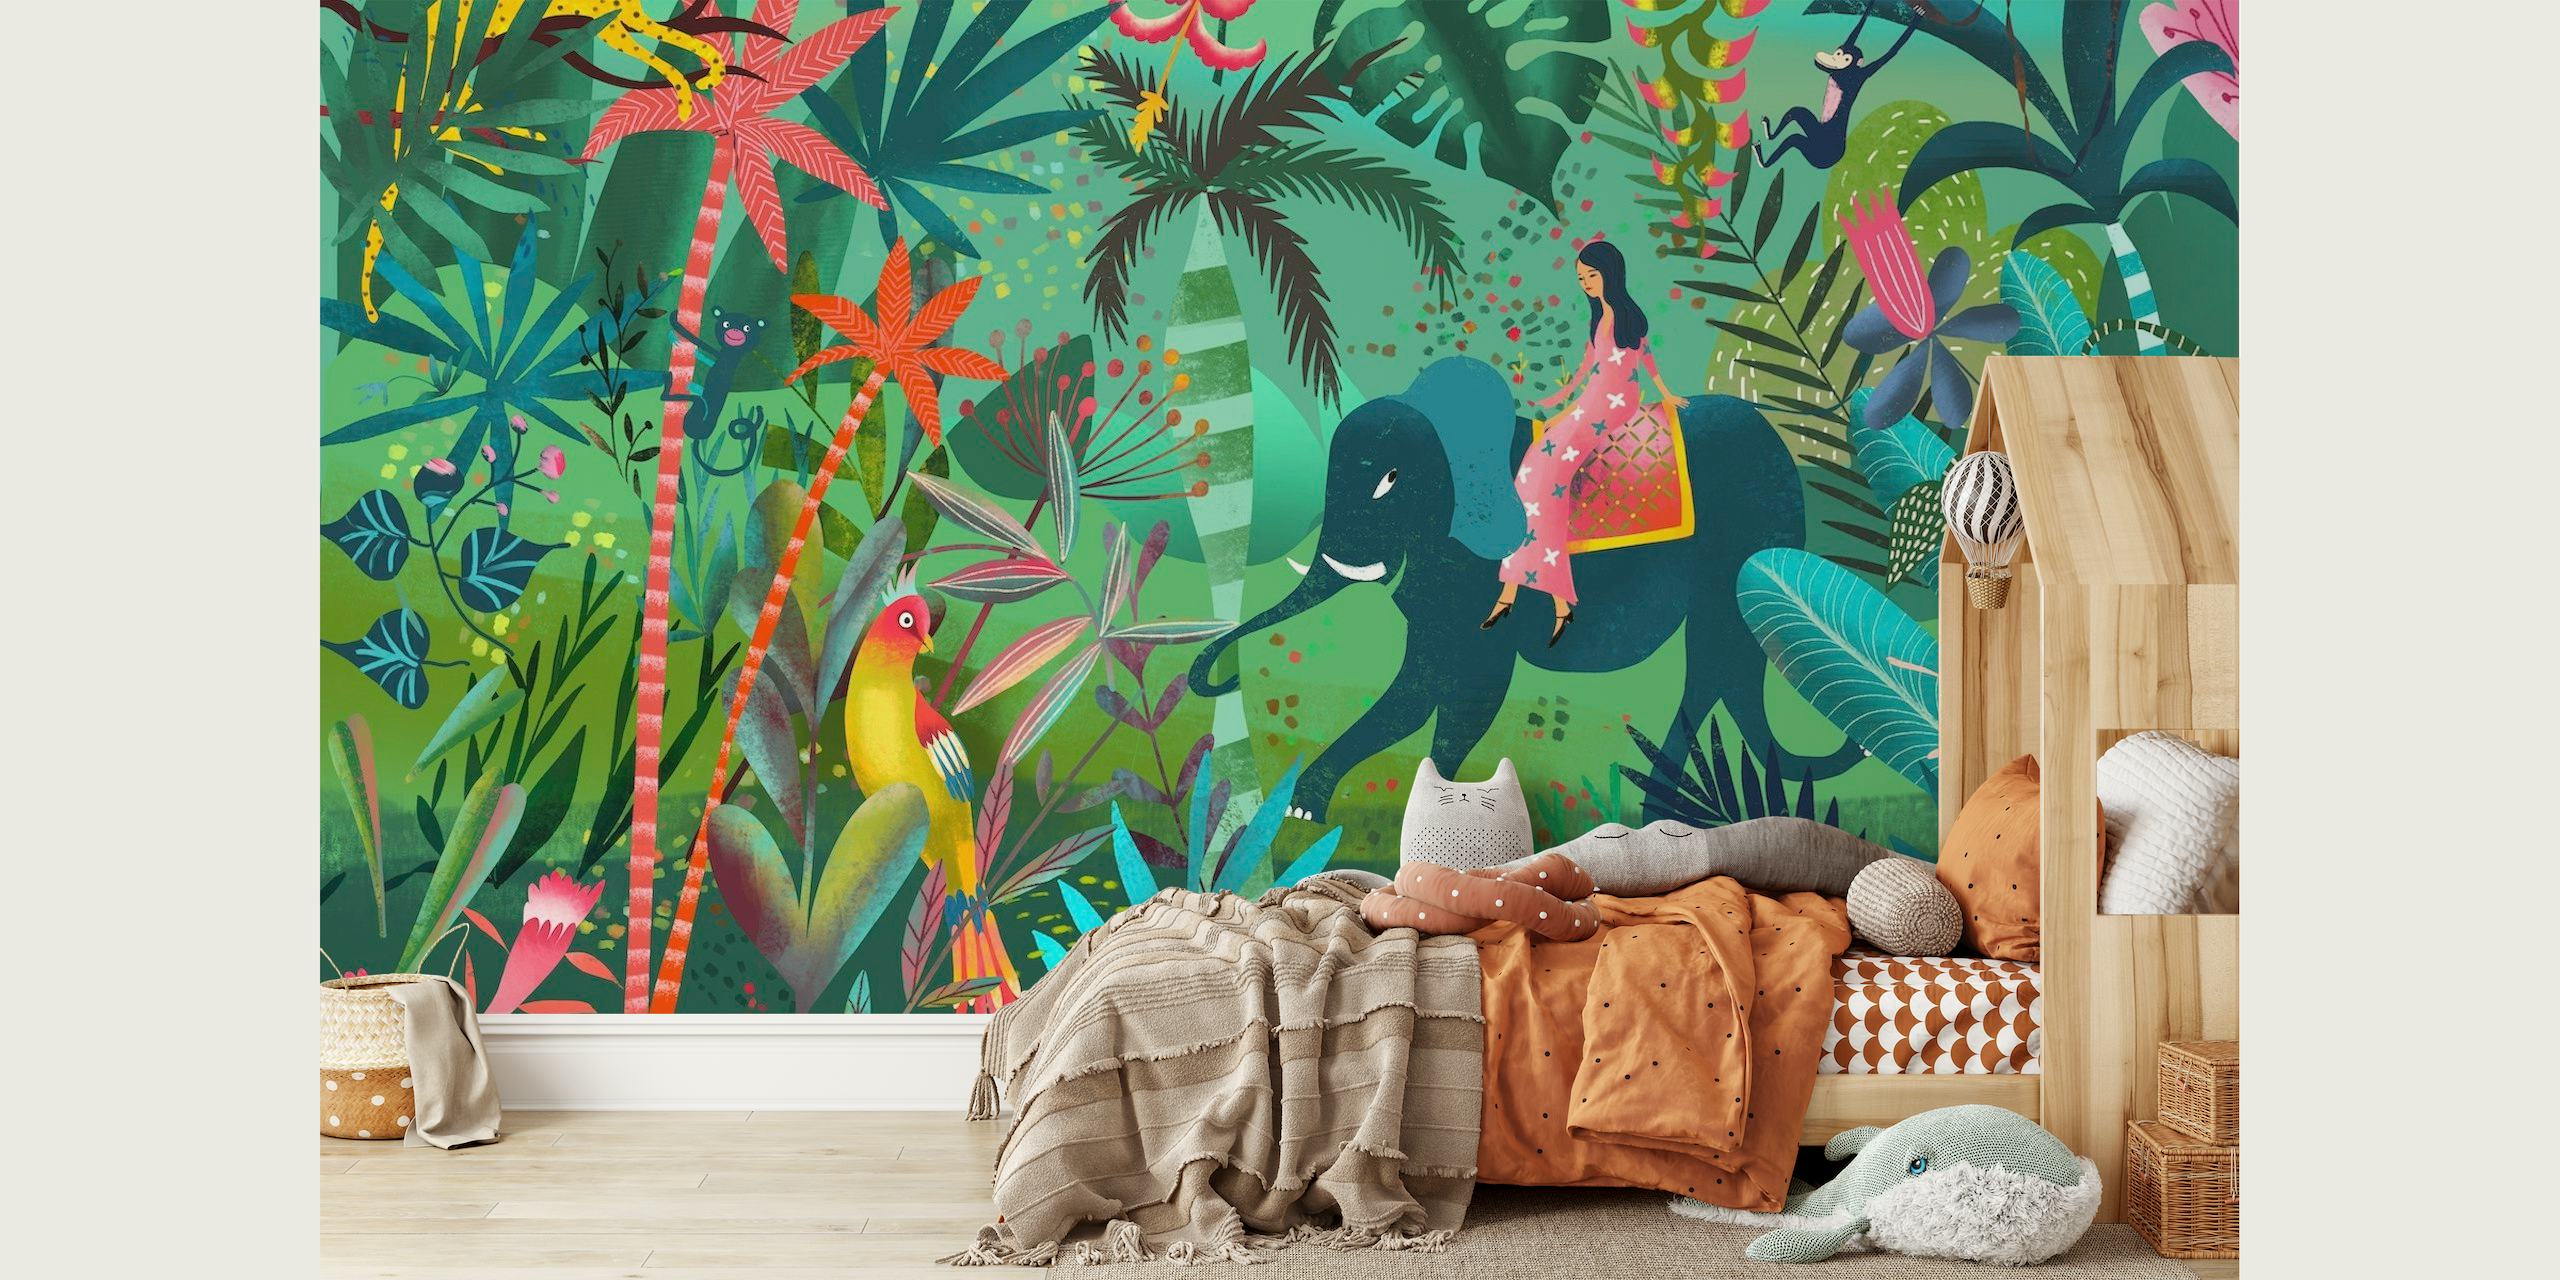 Colorful elephant jungle ride wall mural with tropical plants and wildlife